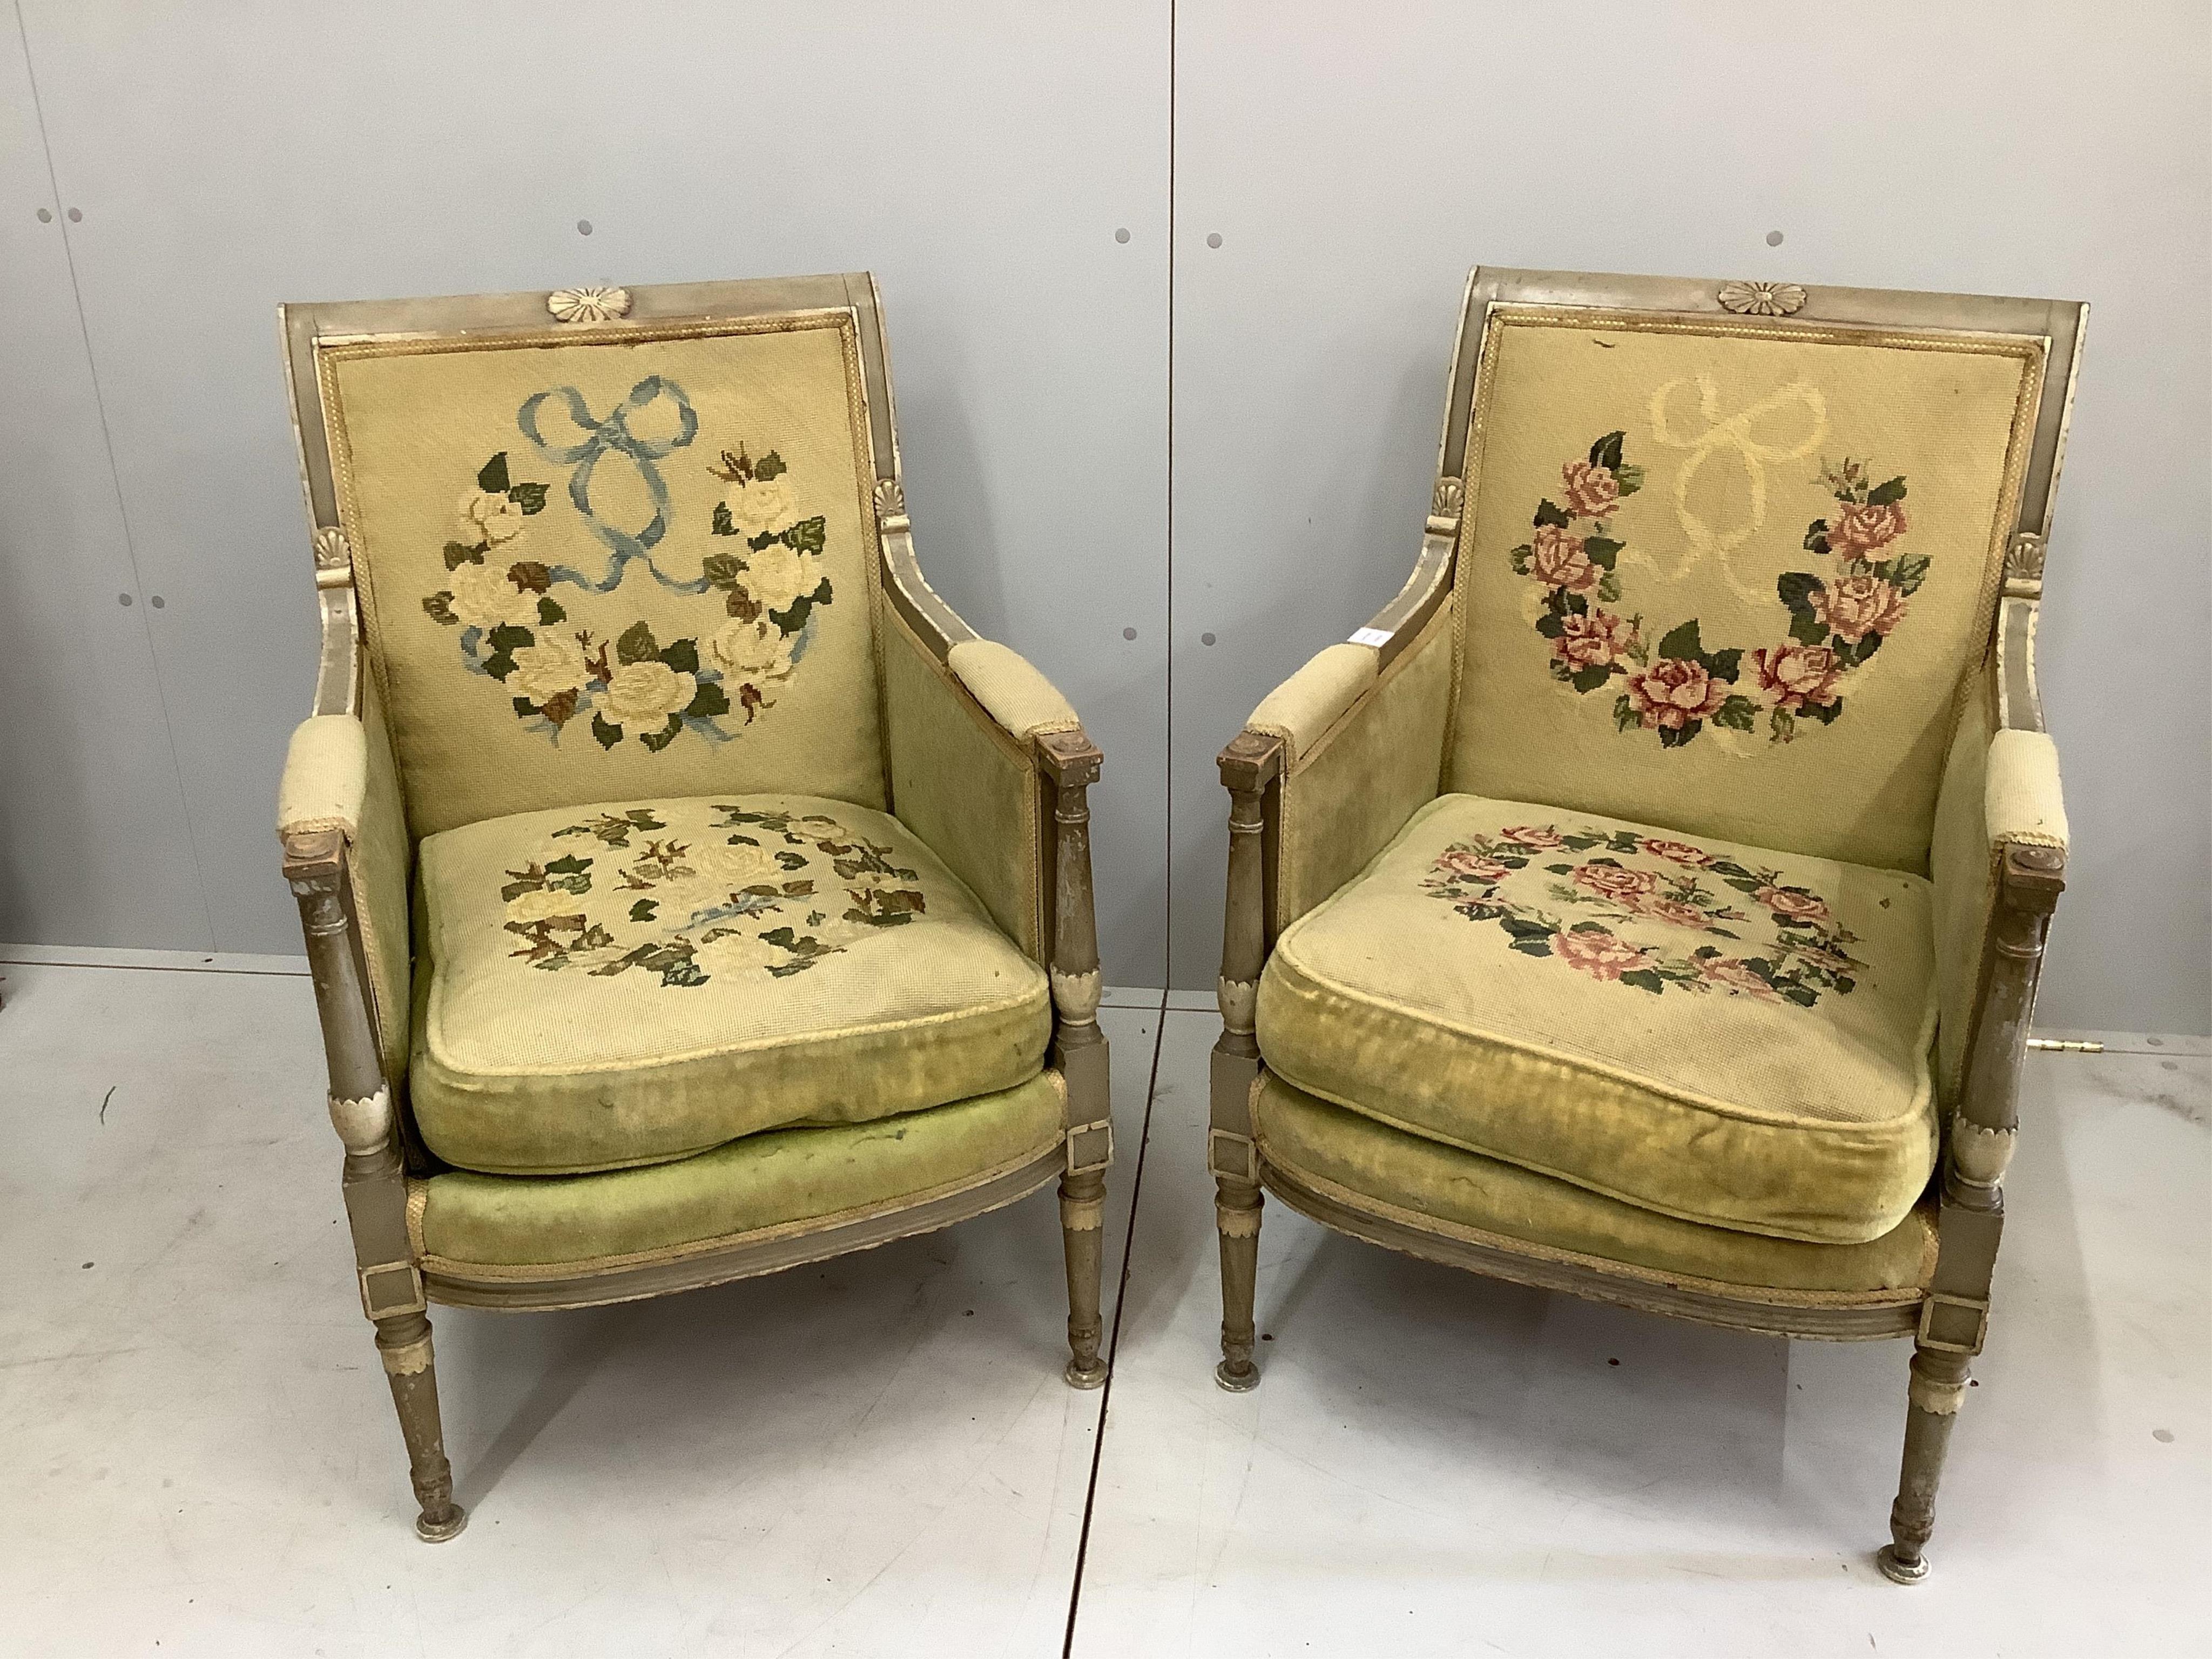 A pair of 19th century French chairs, width 60cm, depth 60cm, height 88cm. Condition - fair